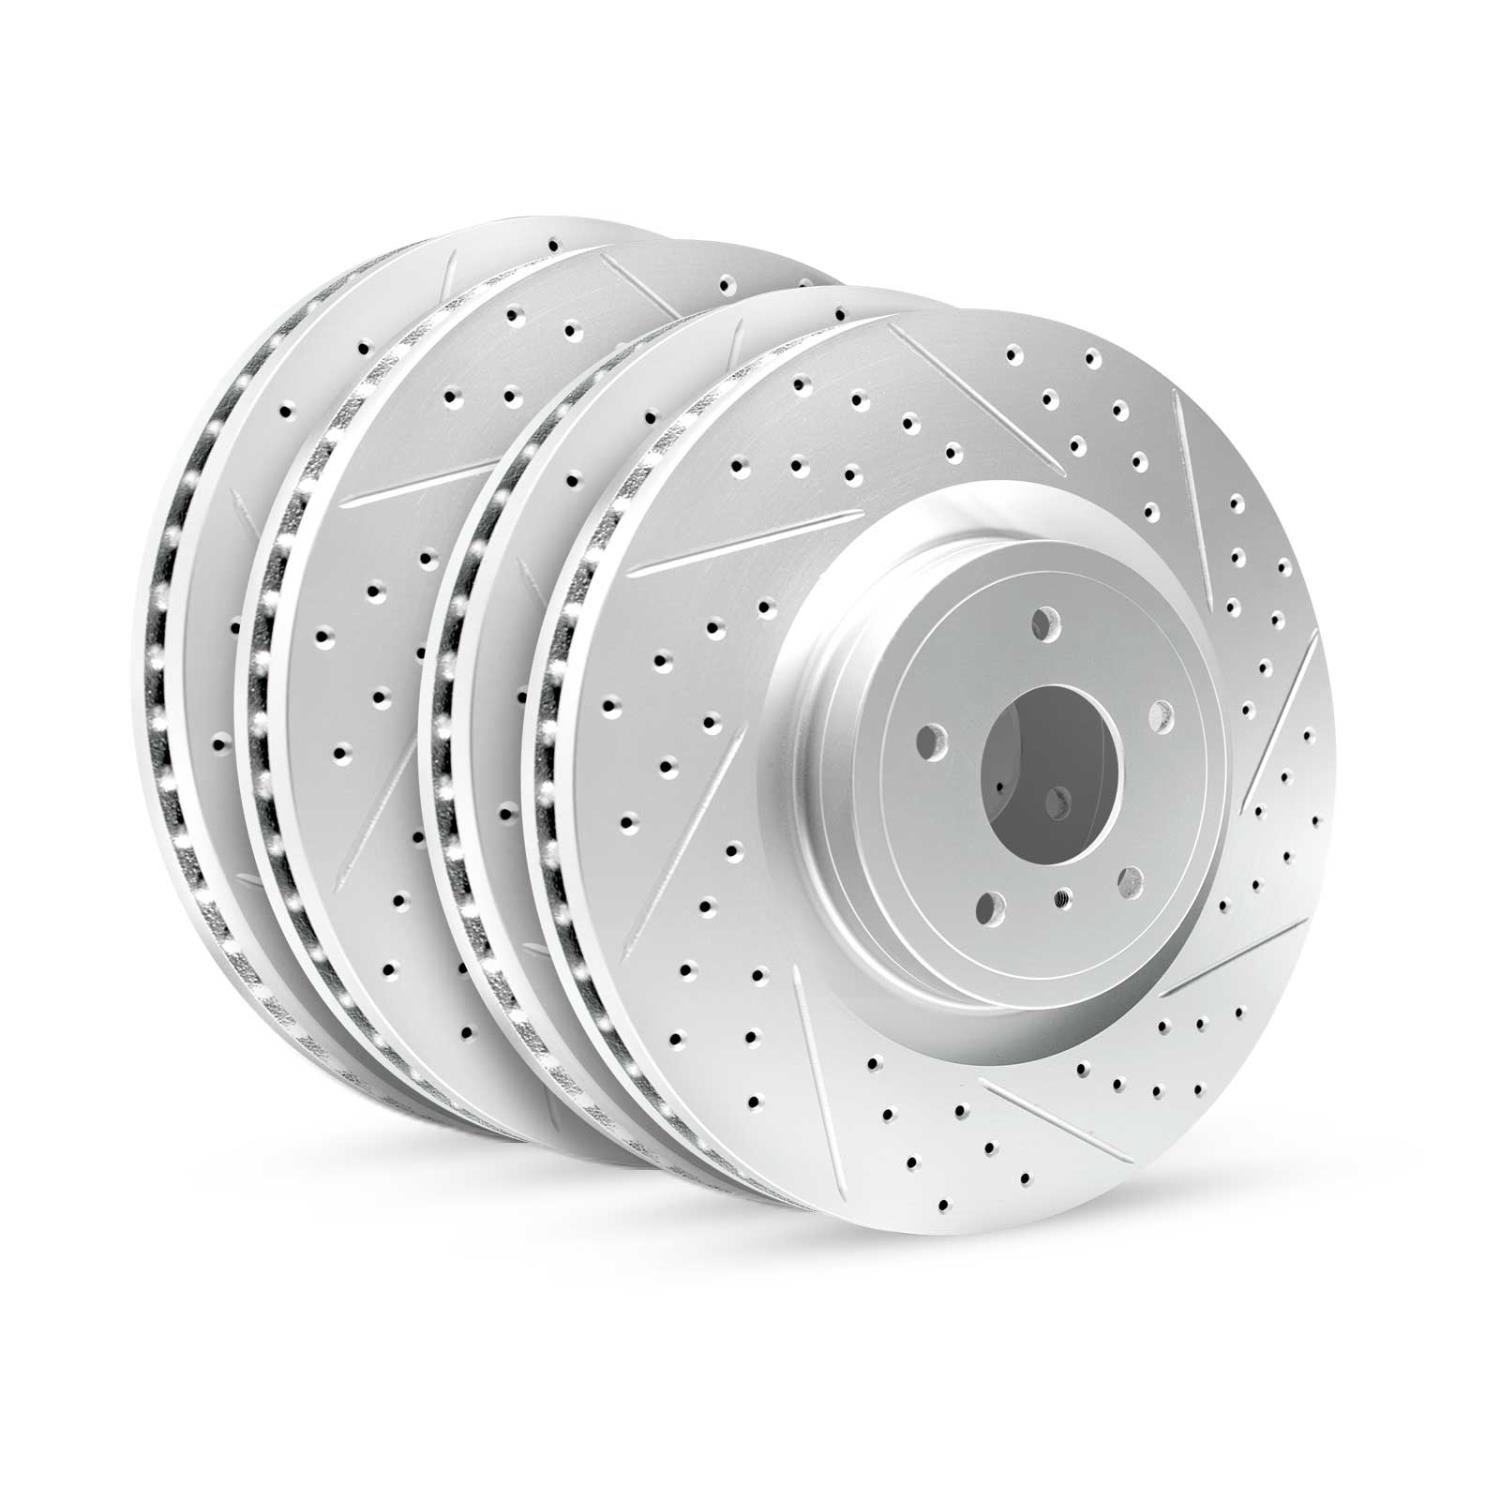 GEO-Carbon Drilled/Slotted Rotors, 2020-2020 Ford/Mazda,